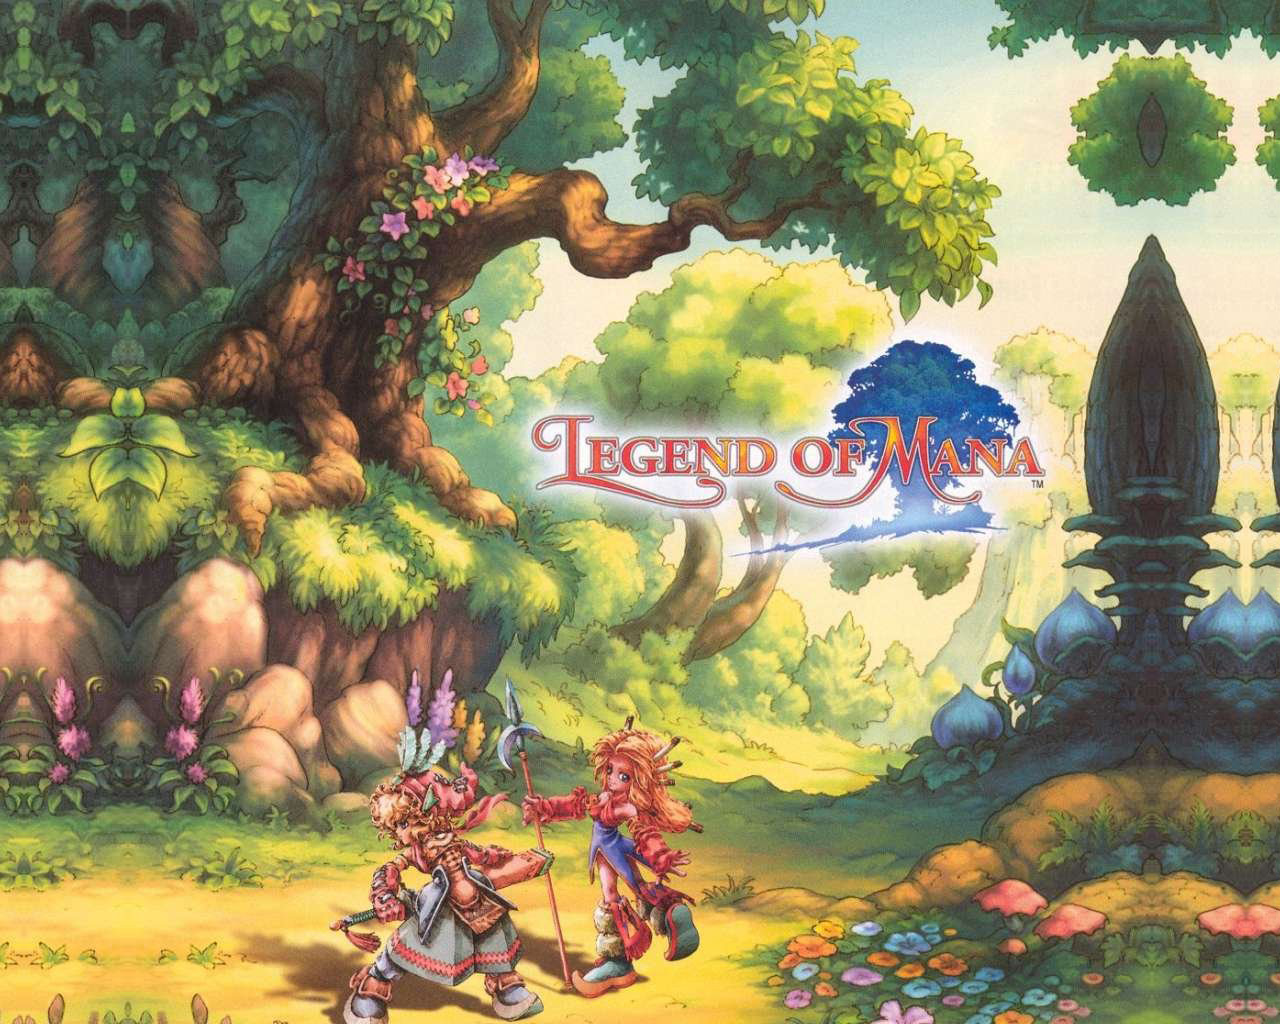 Legend of Mana Review – Part 4 of 4 of Secret of Mana Review Series